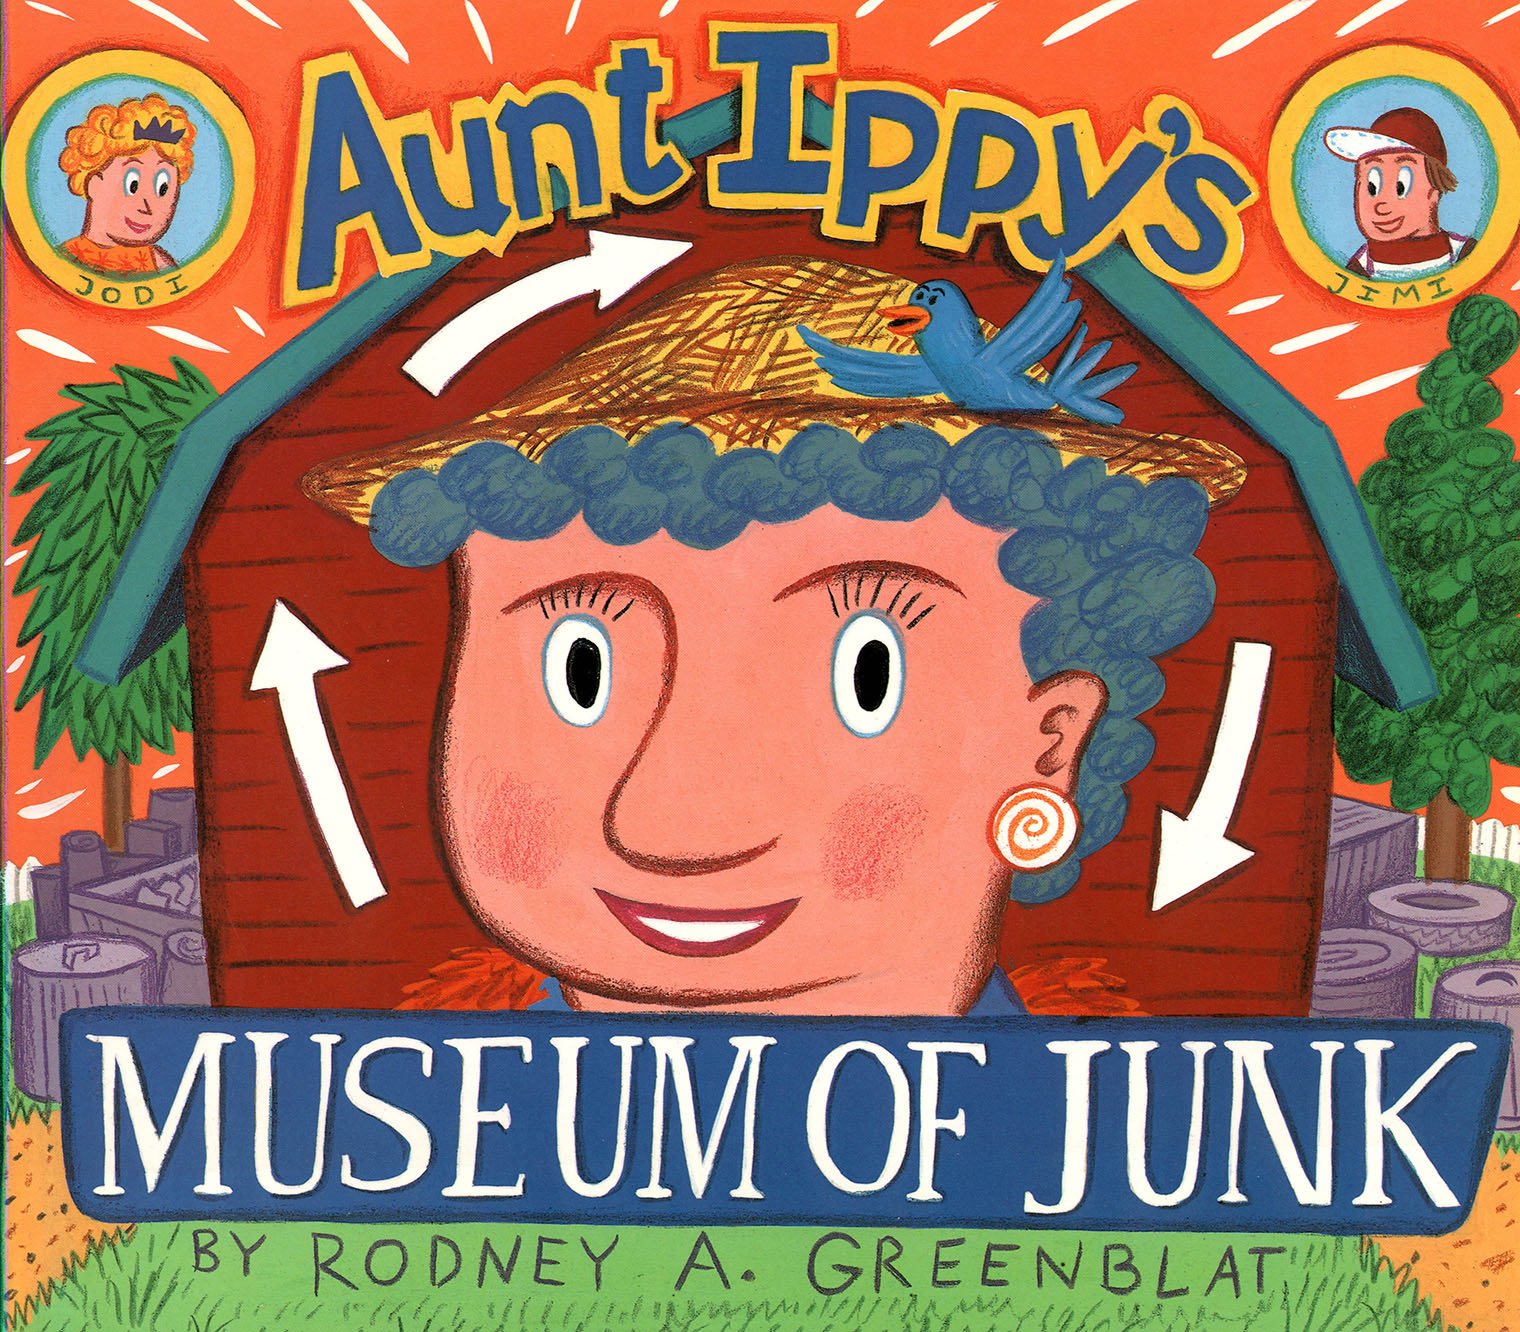 Cover of the book Aunt Ippy's Museum of Junk. Features an illustration of Aunt Ippy with arrows in a circular design around her face to emulate the traditional recycling logo.